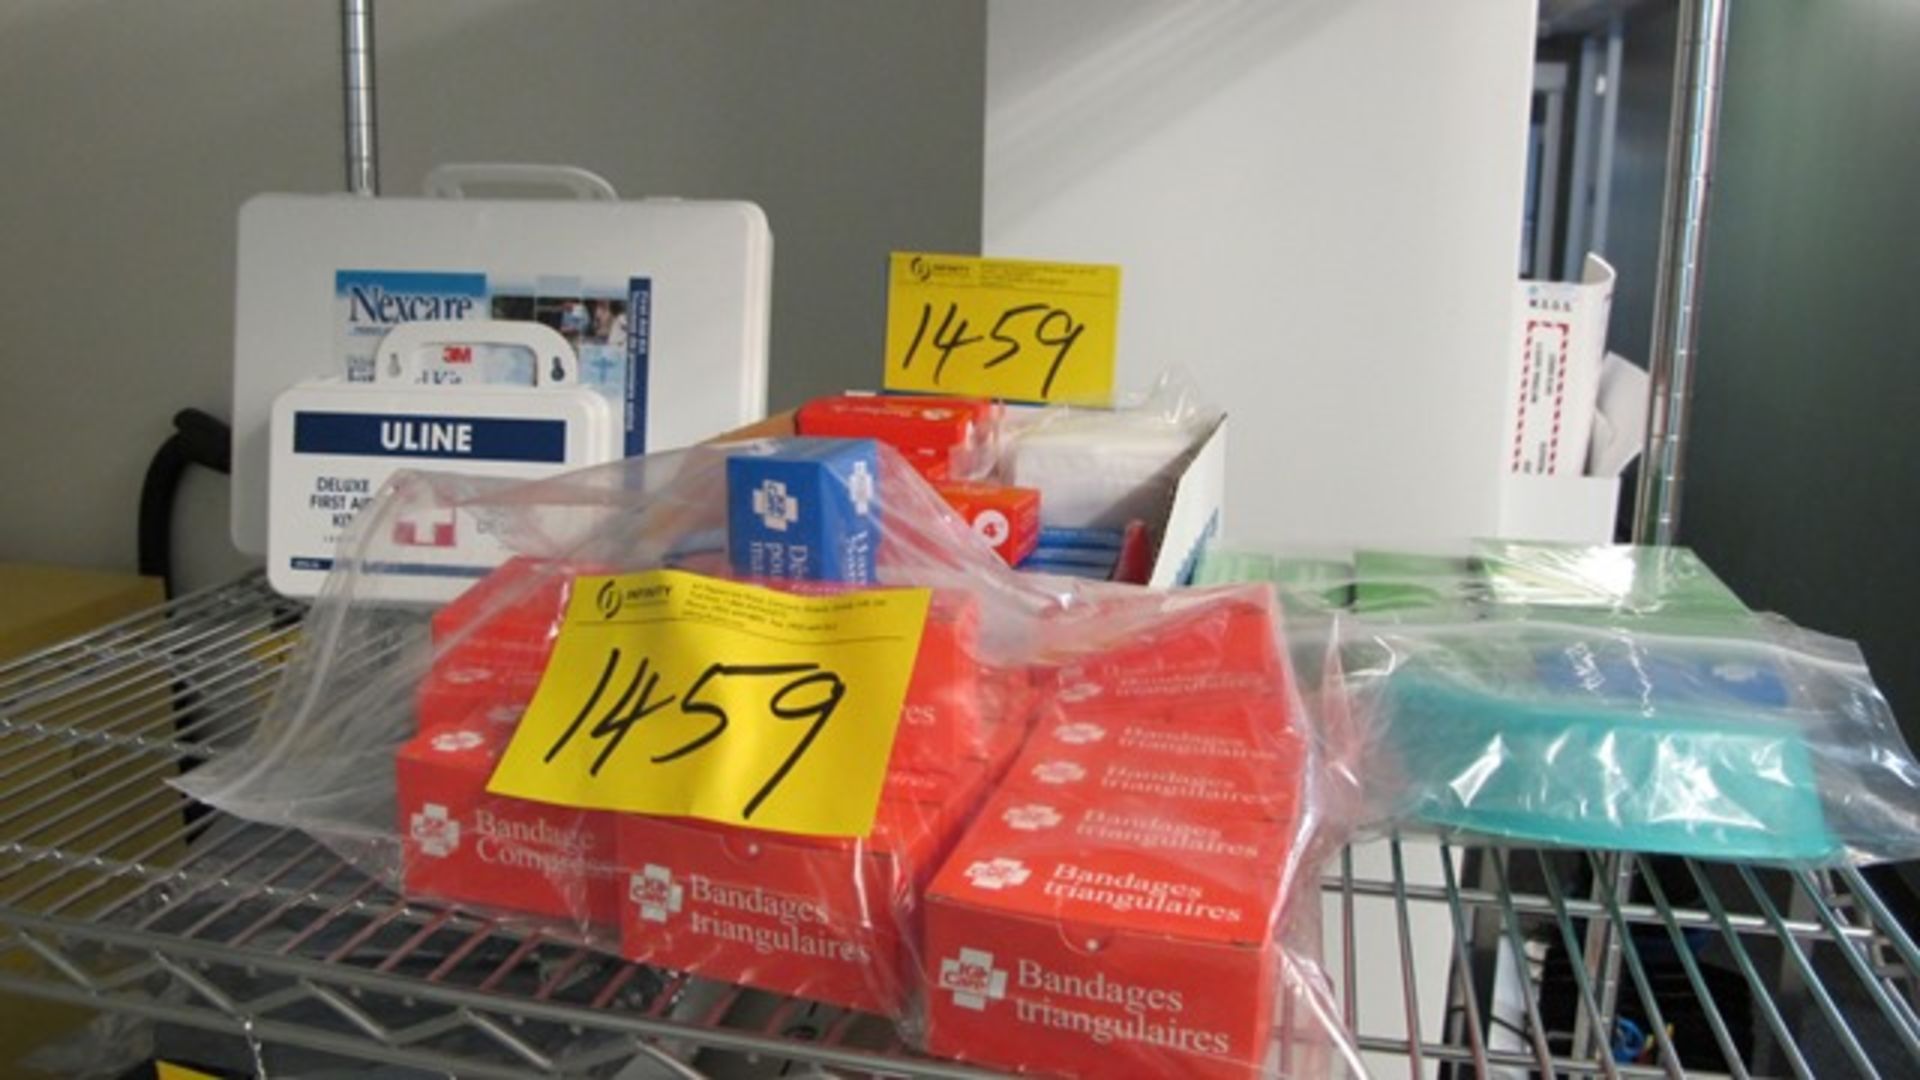 LOT ASST. FIRST AID KITS, SUPPIES, STRETCHER LOCK-OUT STATION, ETC. (CLEAN ROOM)